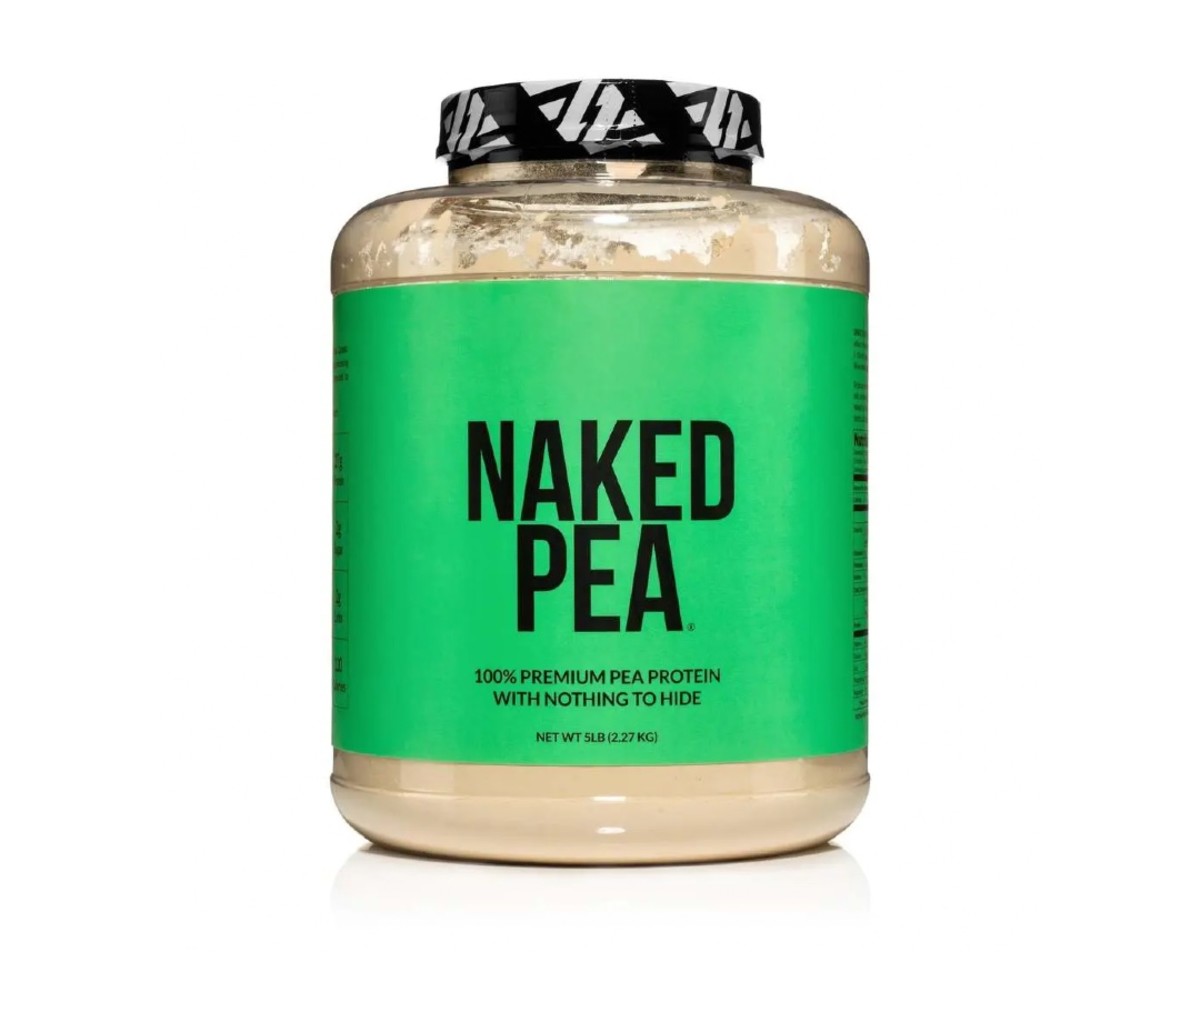 Naked Pea is a clean protein powder that has only one ingredient: pea protein extracted from yellow split peas grown on US and Canadian farms.